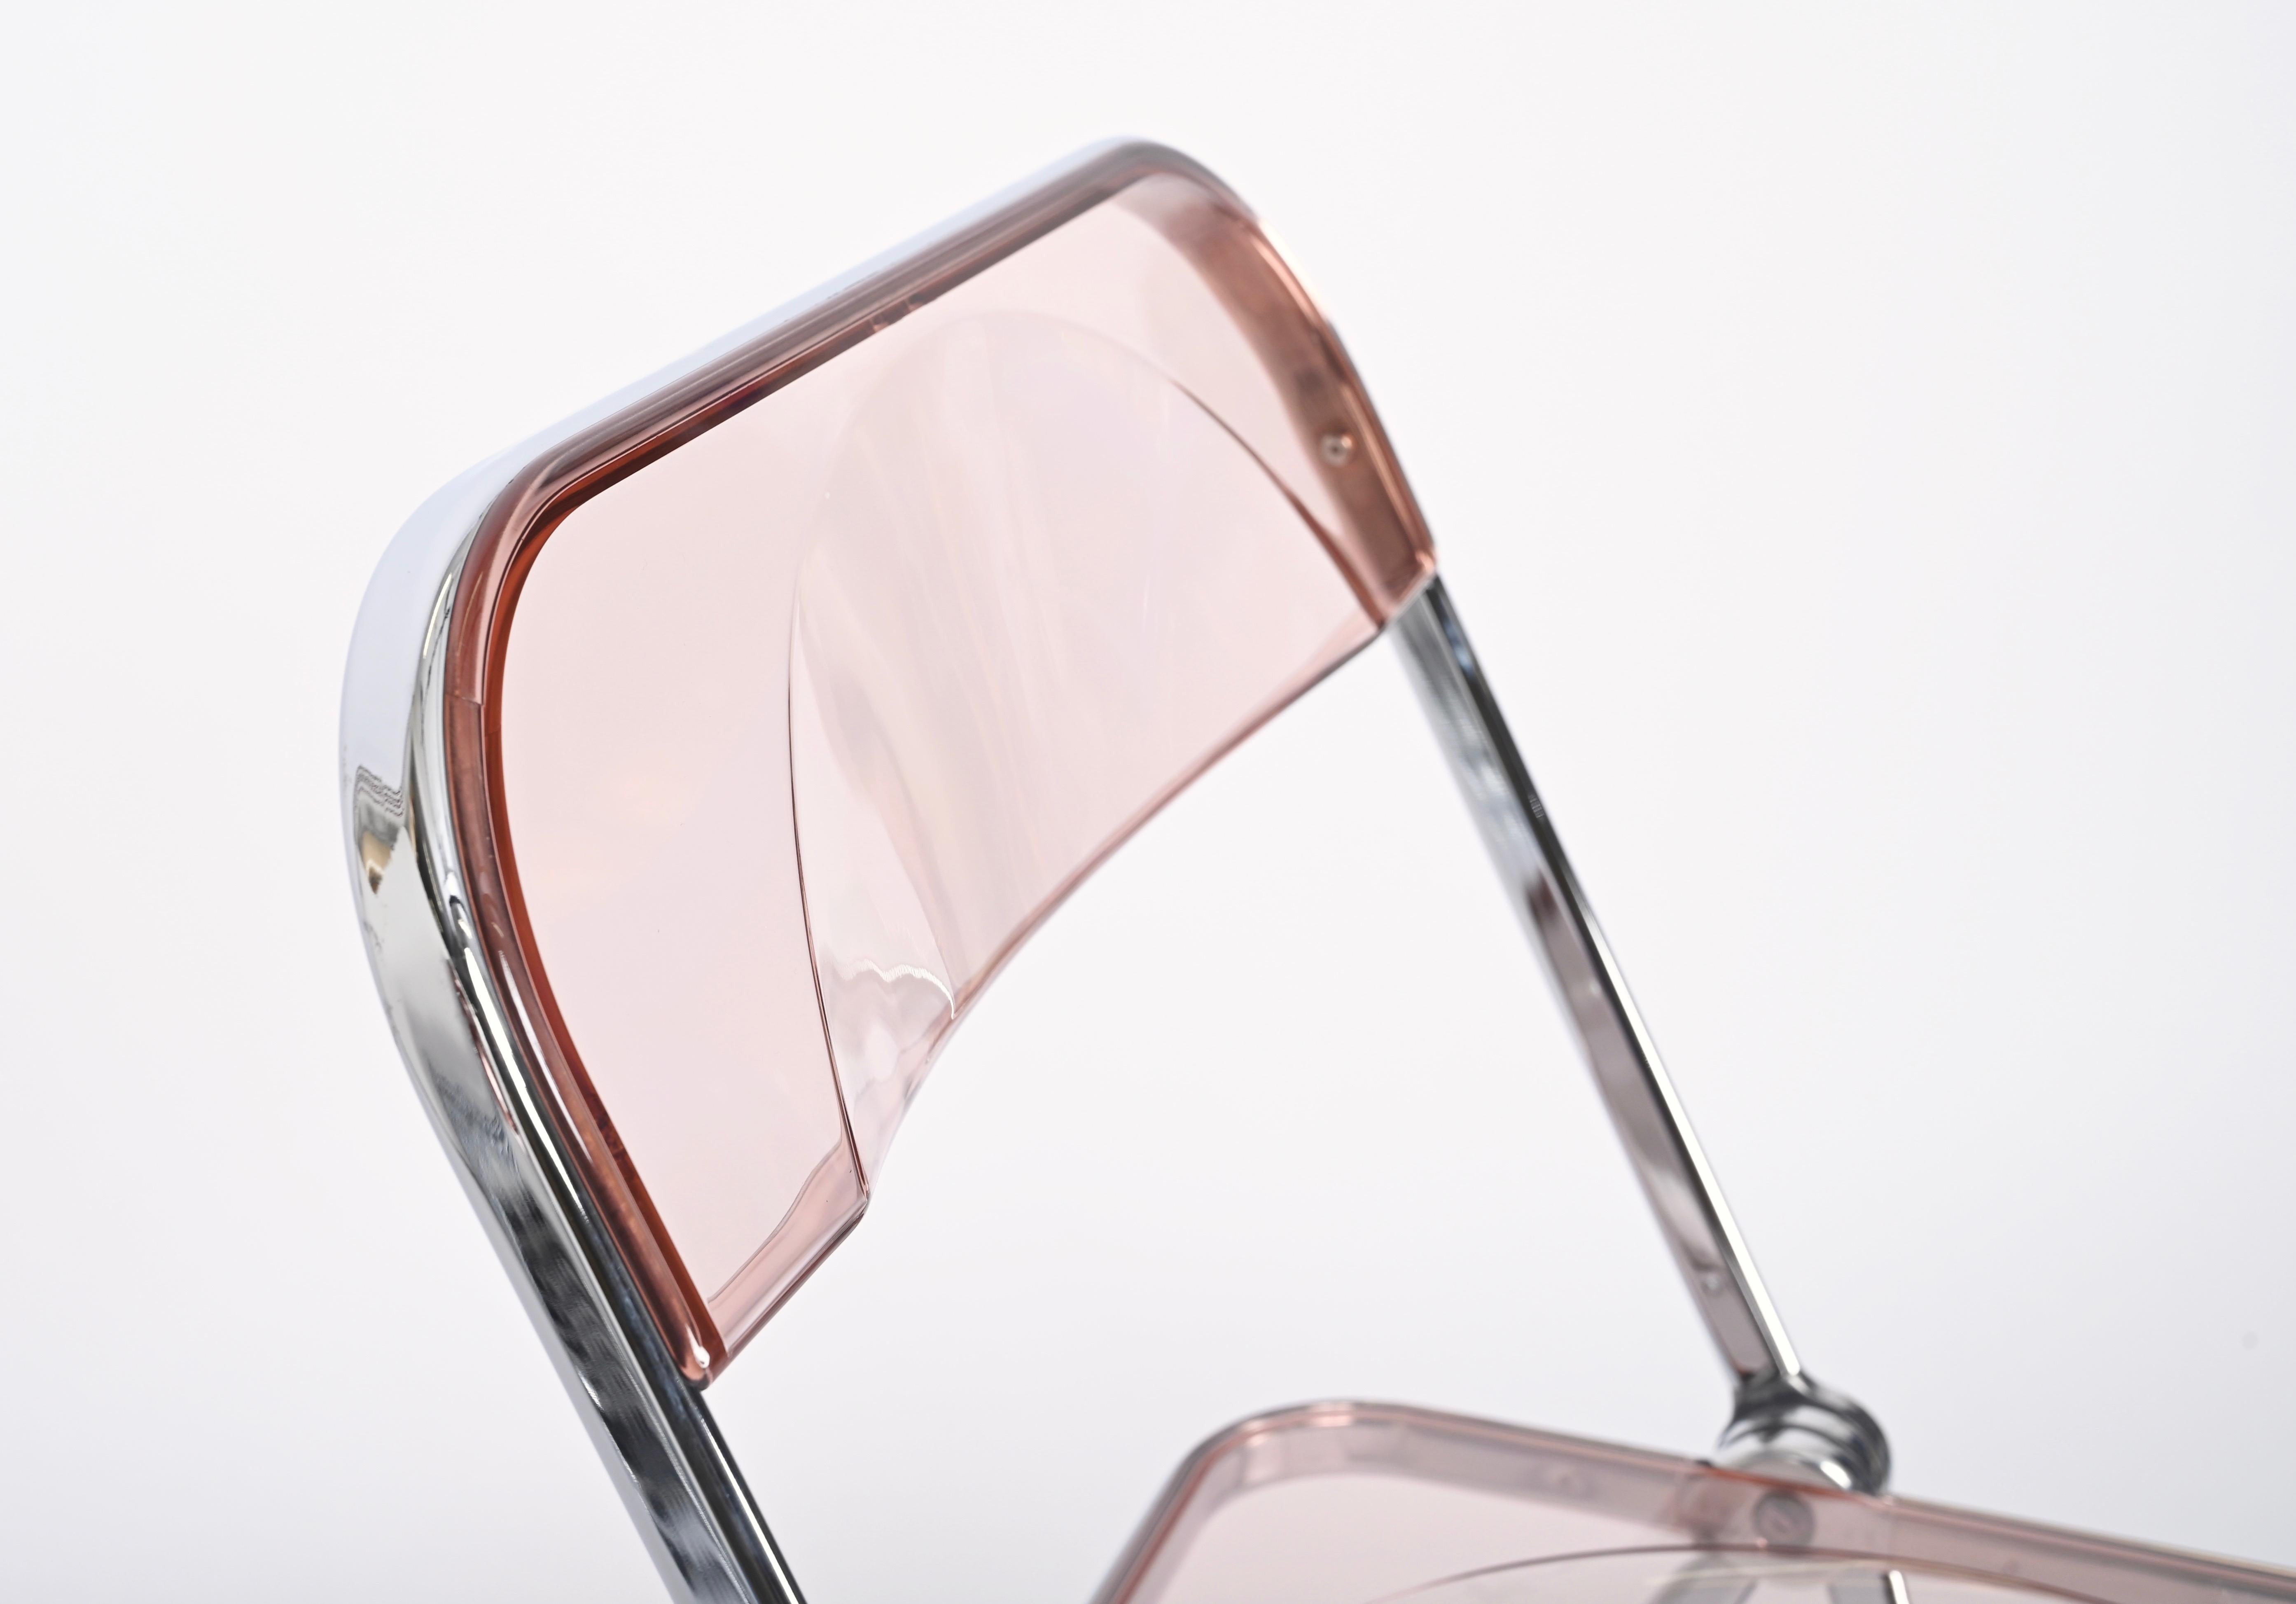 Set of 12 Lucite Pink and Chrome Plia Chairs, Piretti for Castelli, Italy 1970s For Sale 9